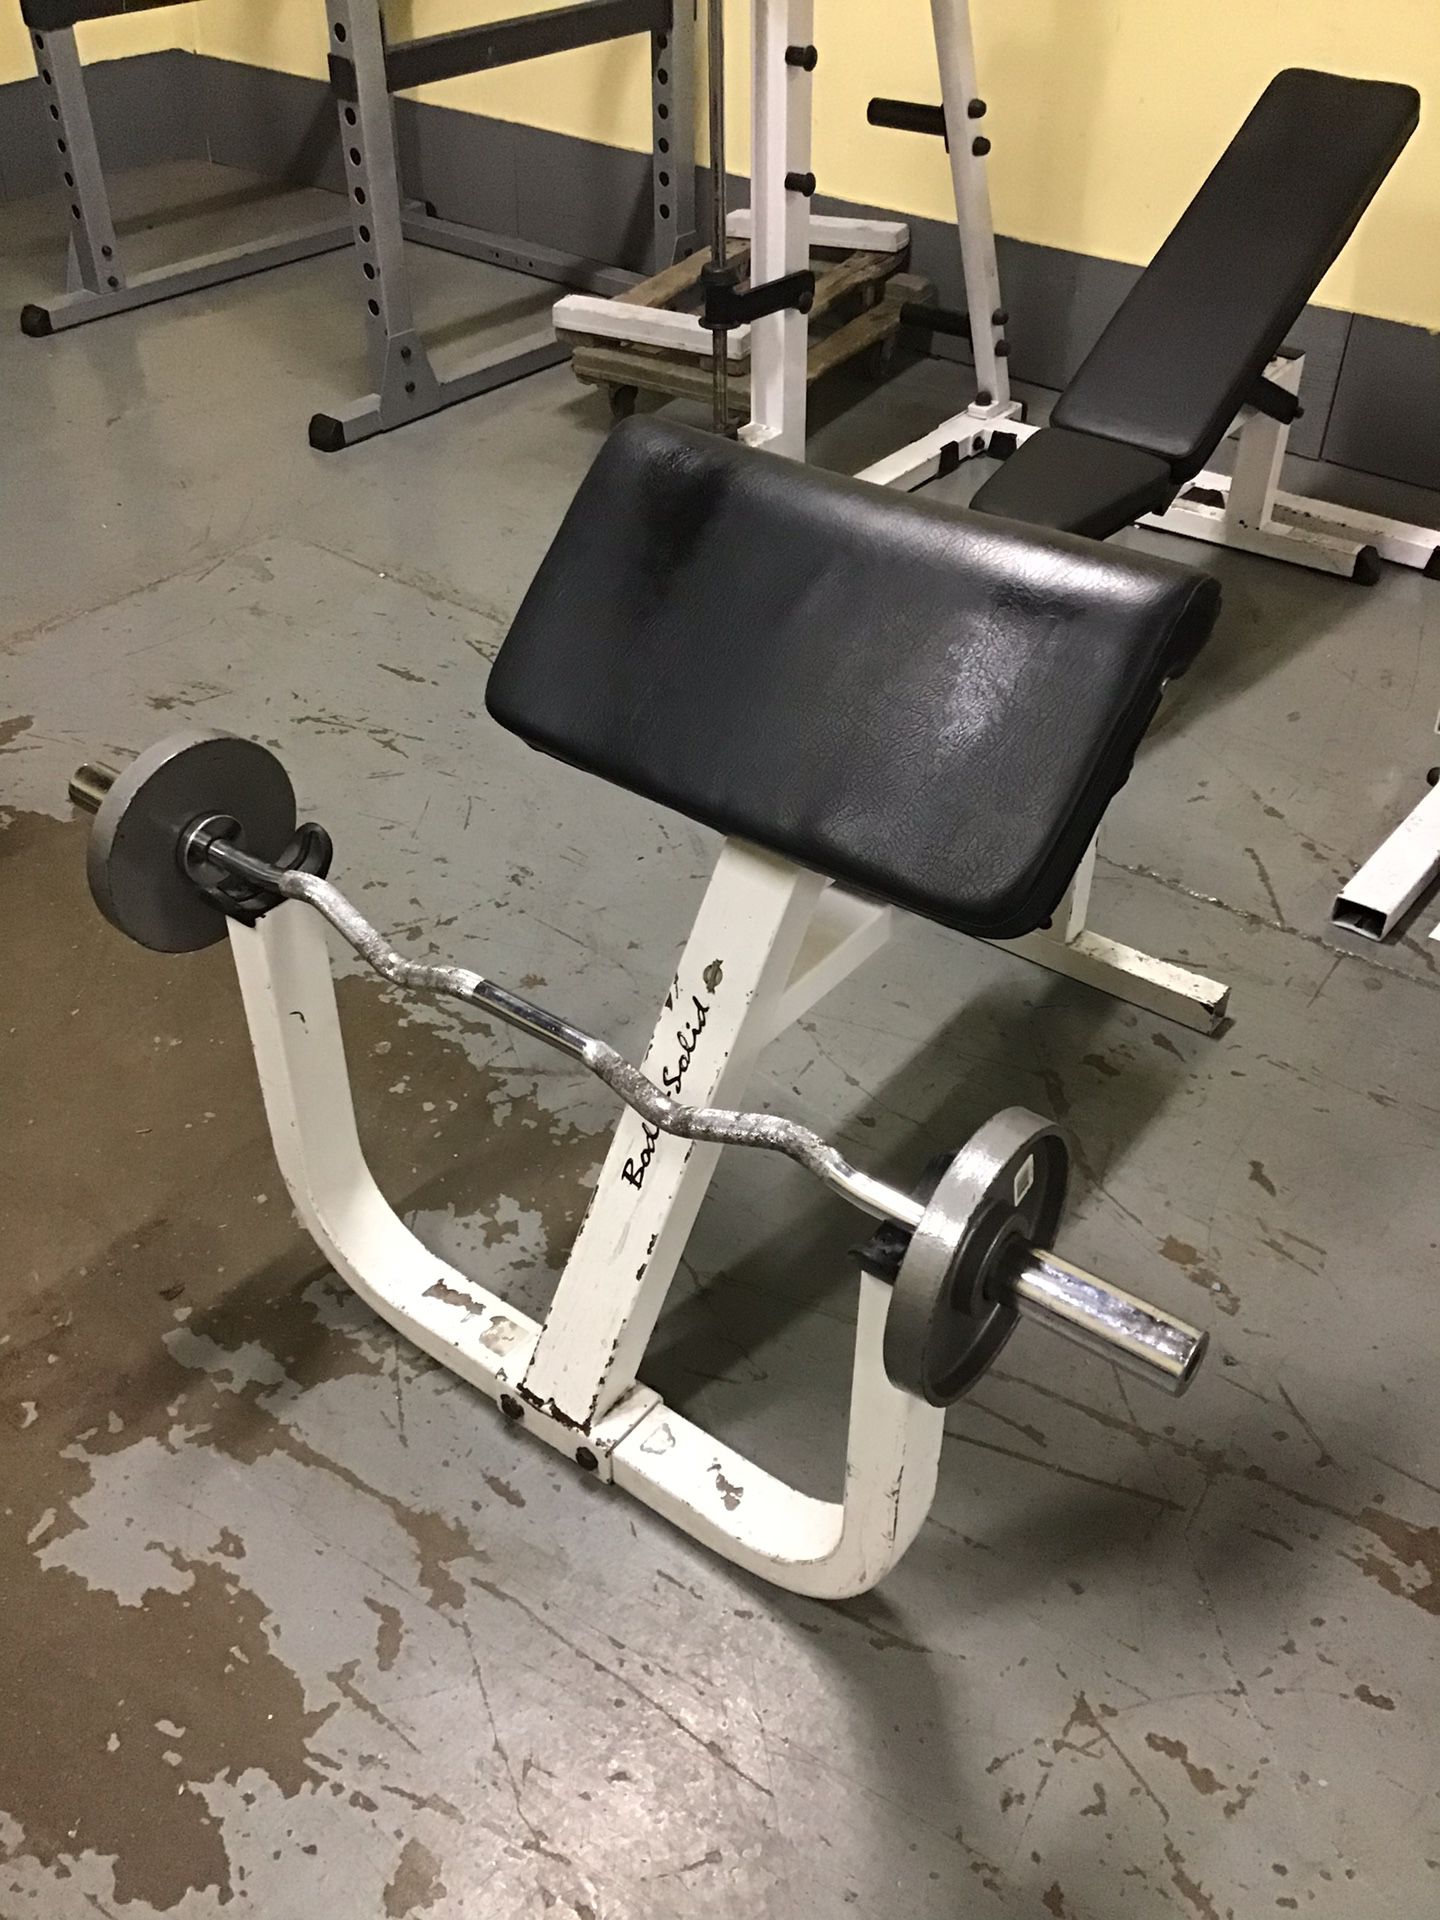 Body-Solid Preacher Curl Bench - weights and bar not included